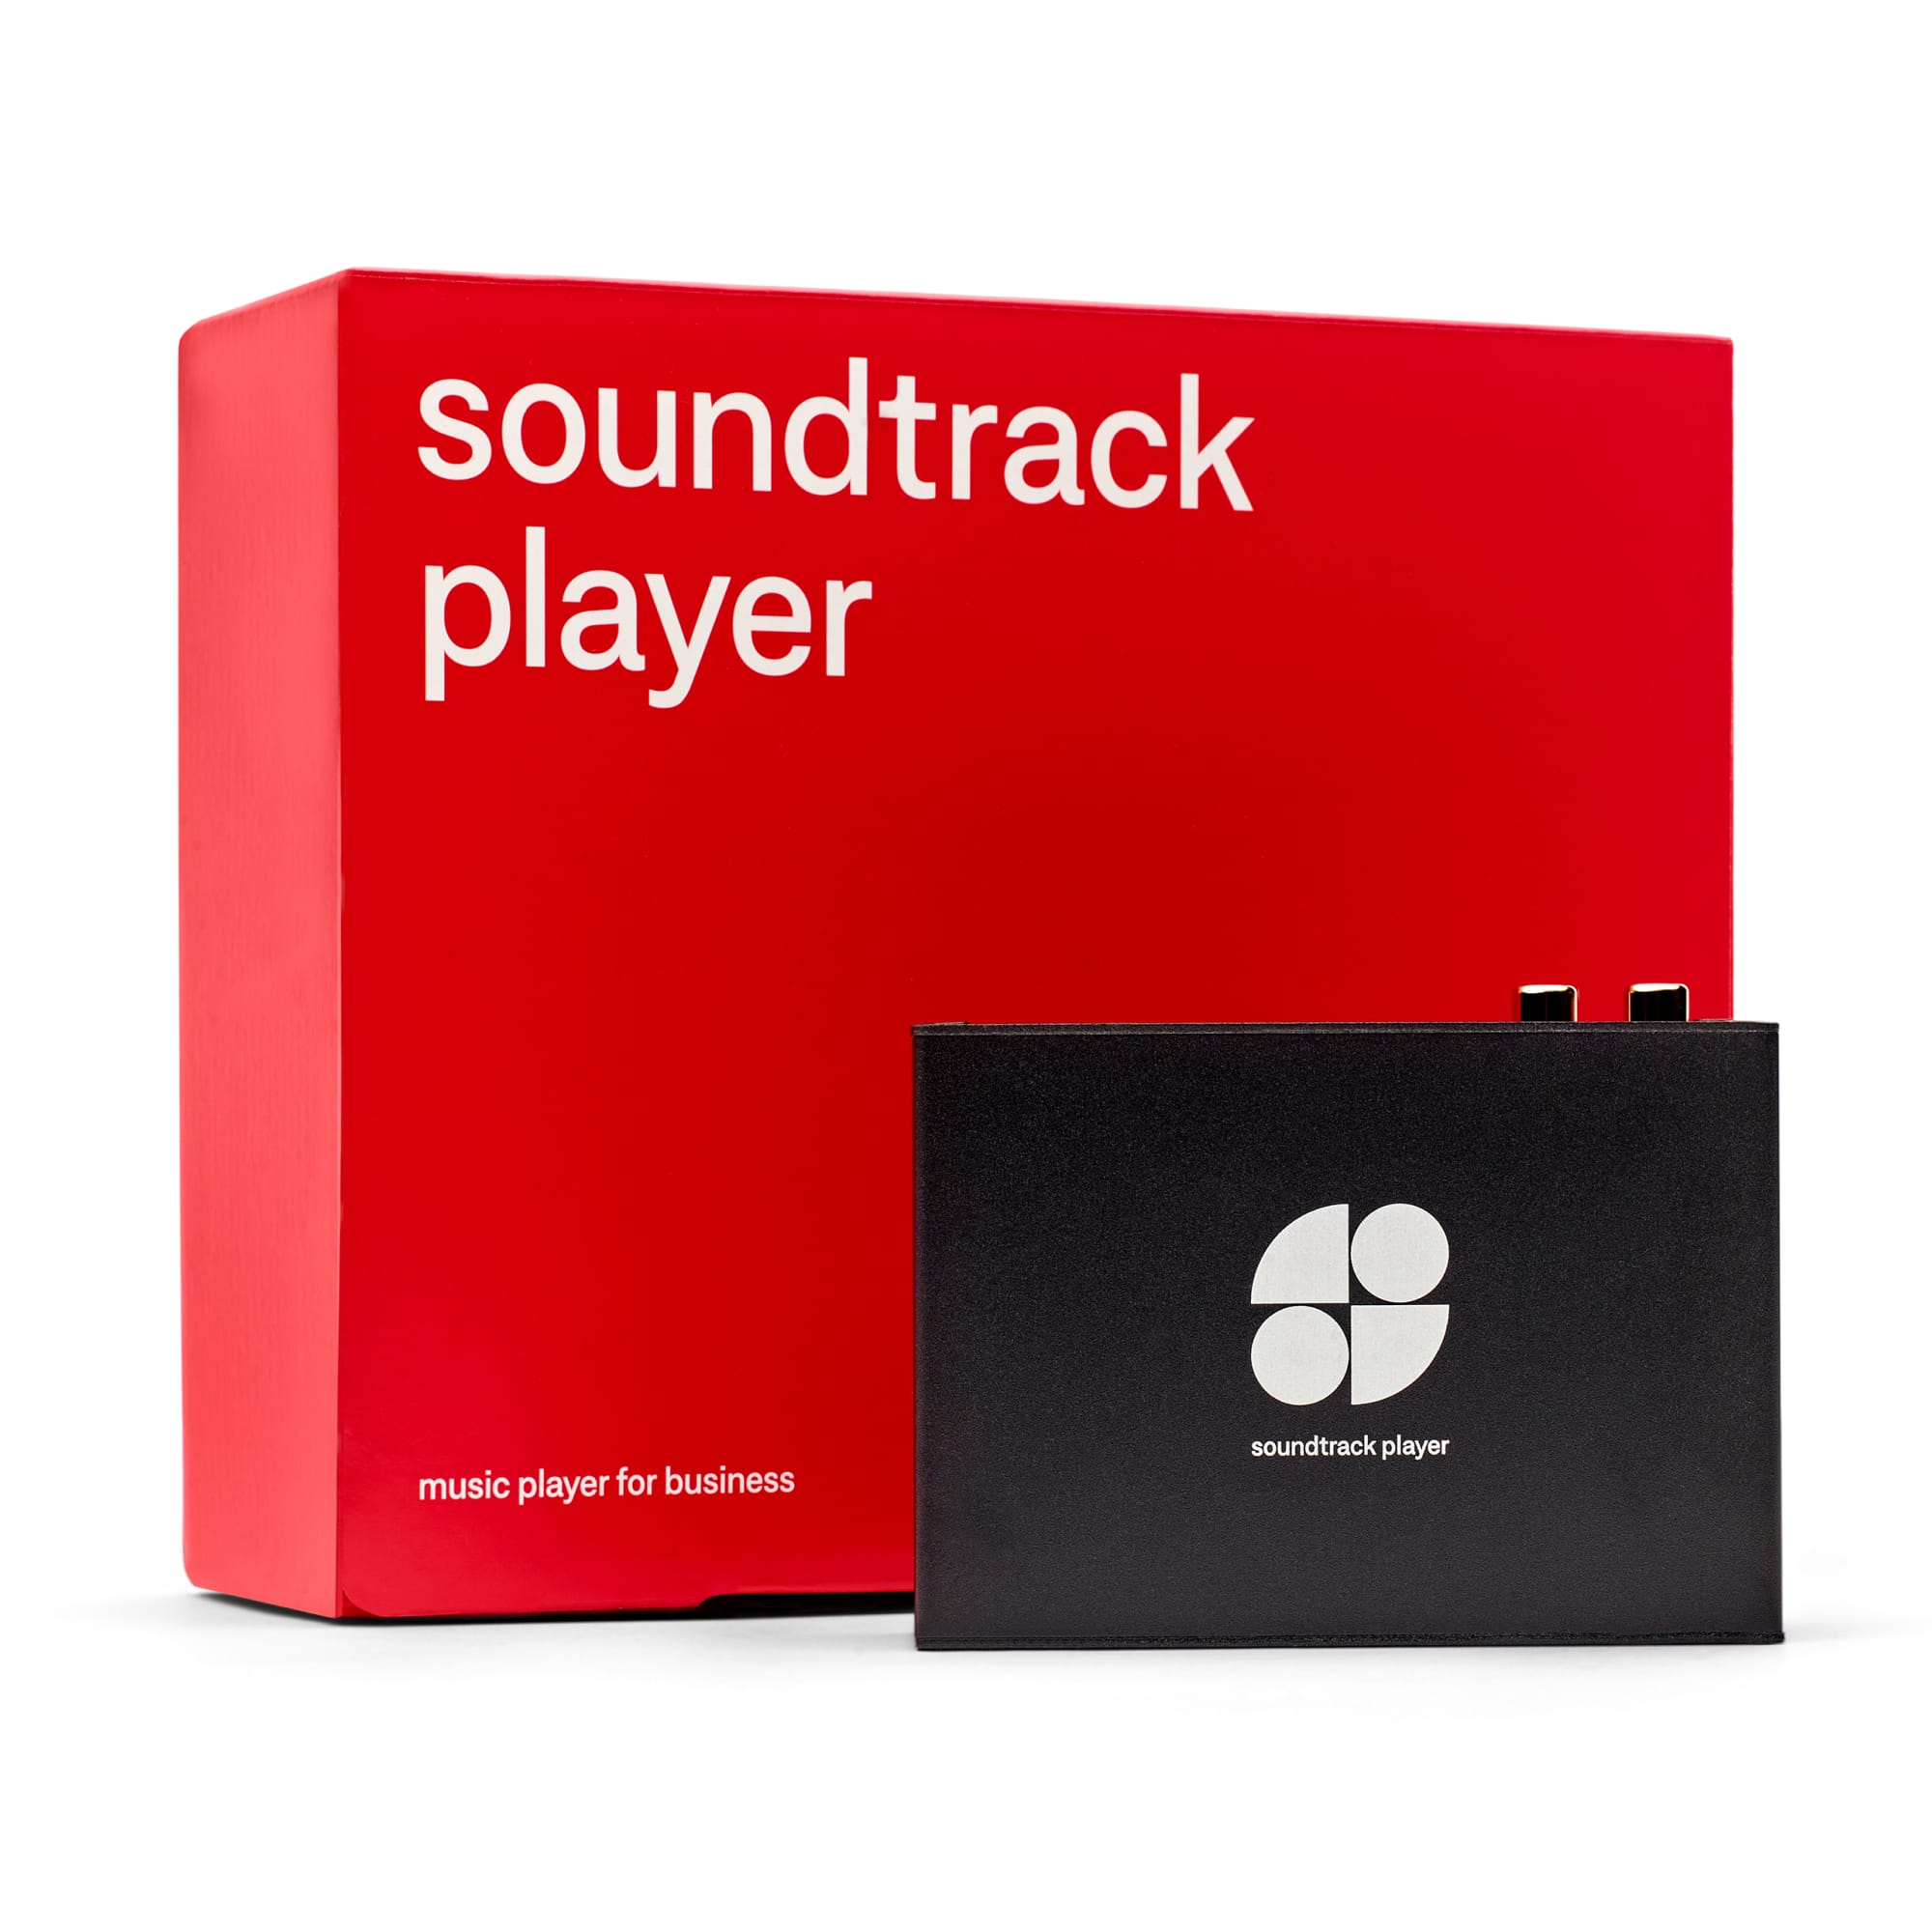 soundtrack player packaging